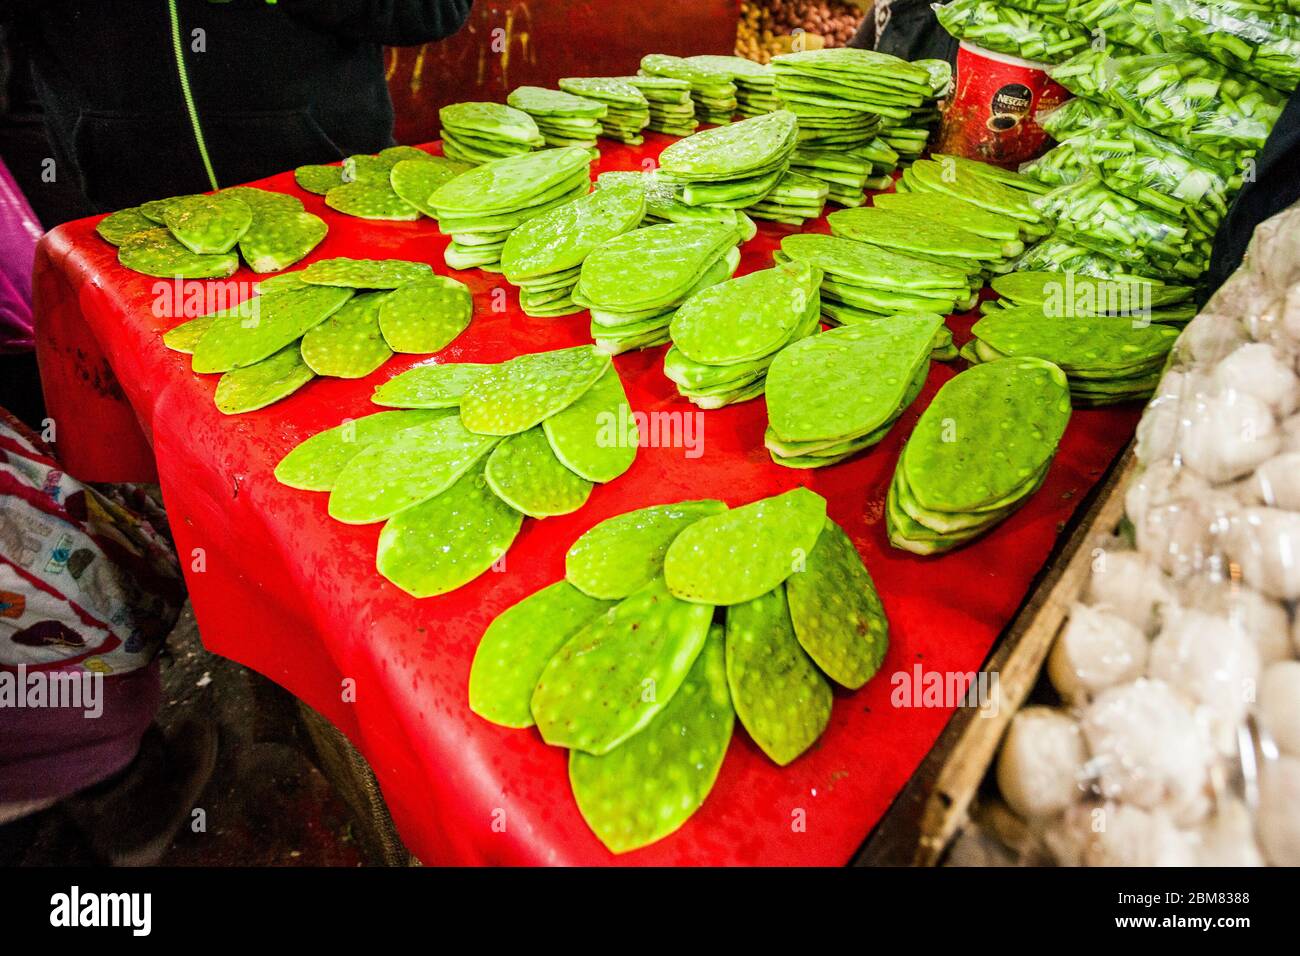 Cleaned and fresh nopales for sale in market store food Stock Photo